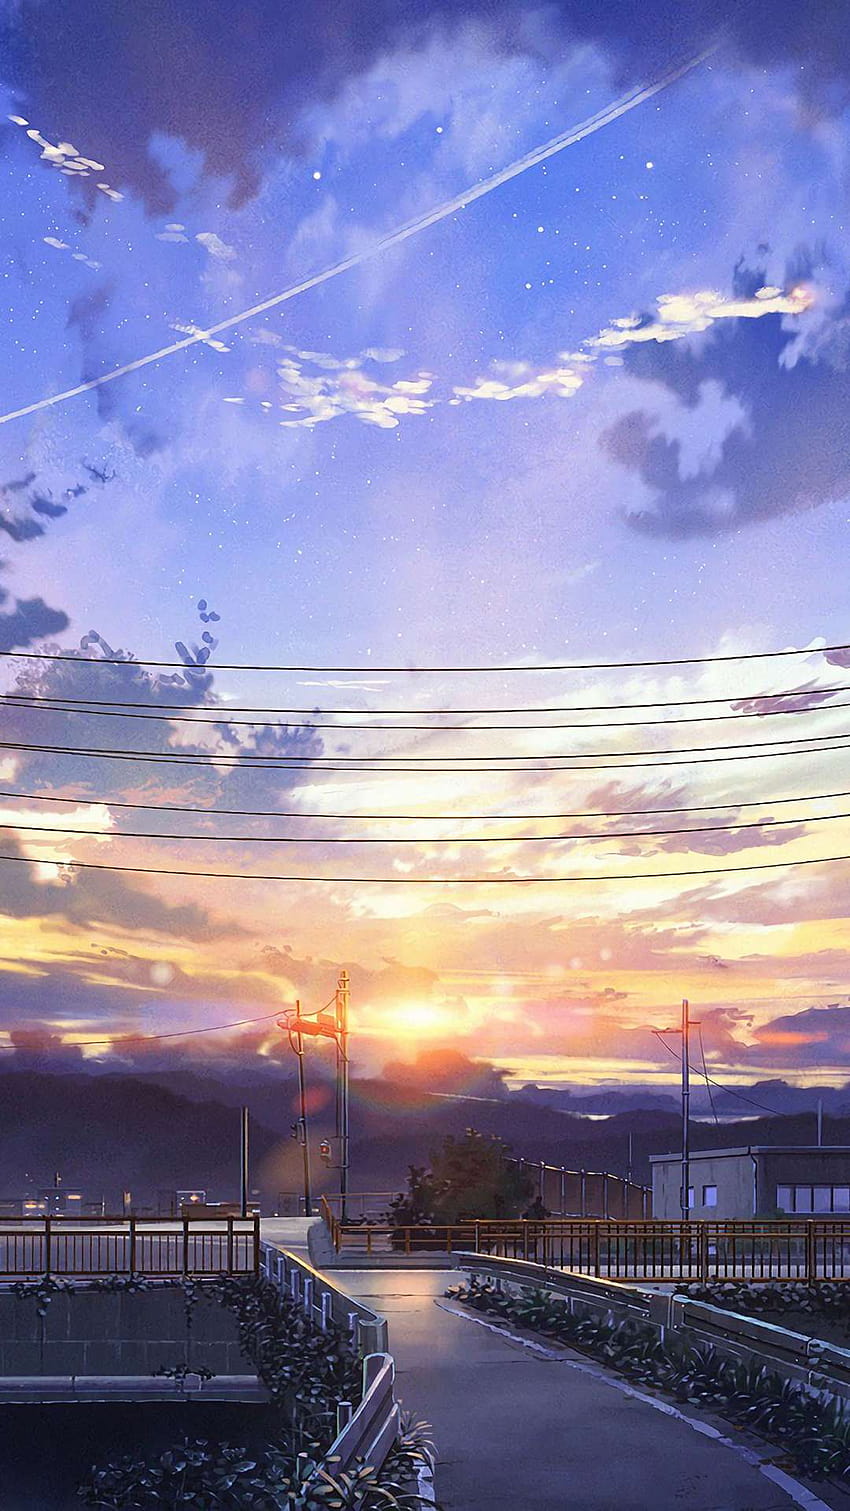 Anime landscape wallpaper with house in the middle by kosagar on DeviantArt-demhanvico.com.vn